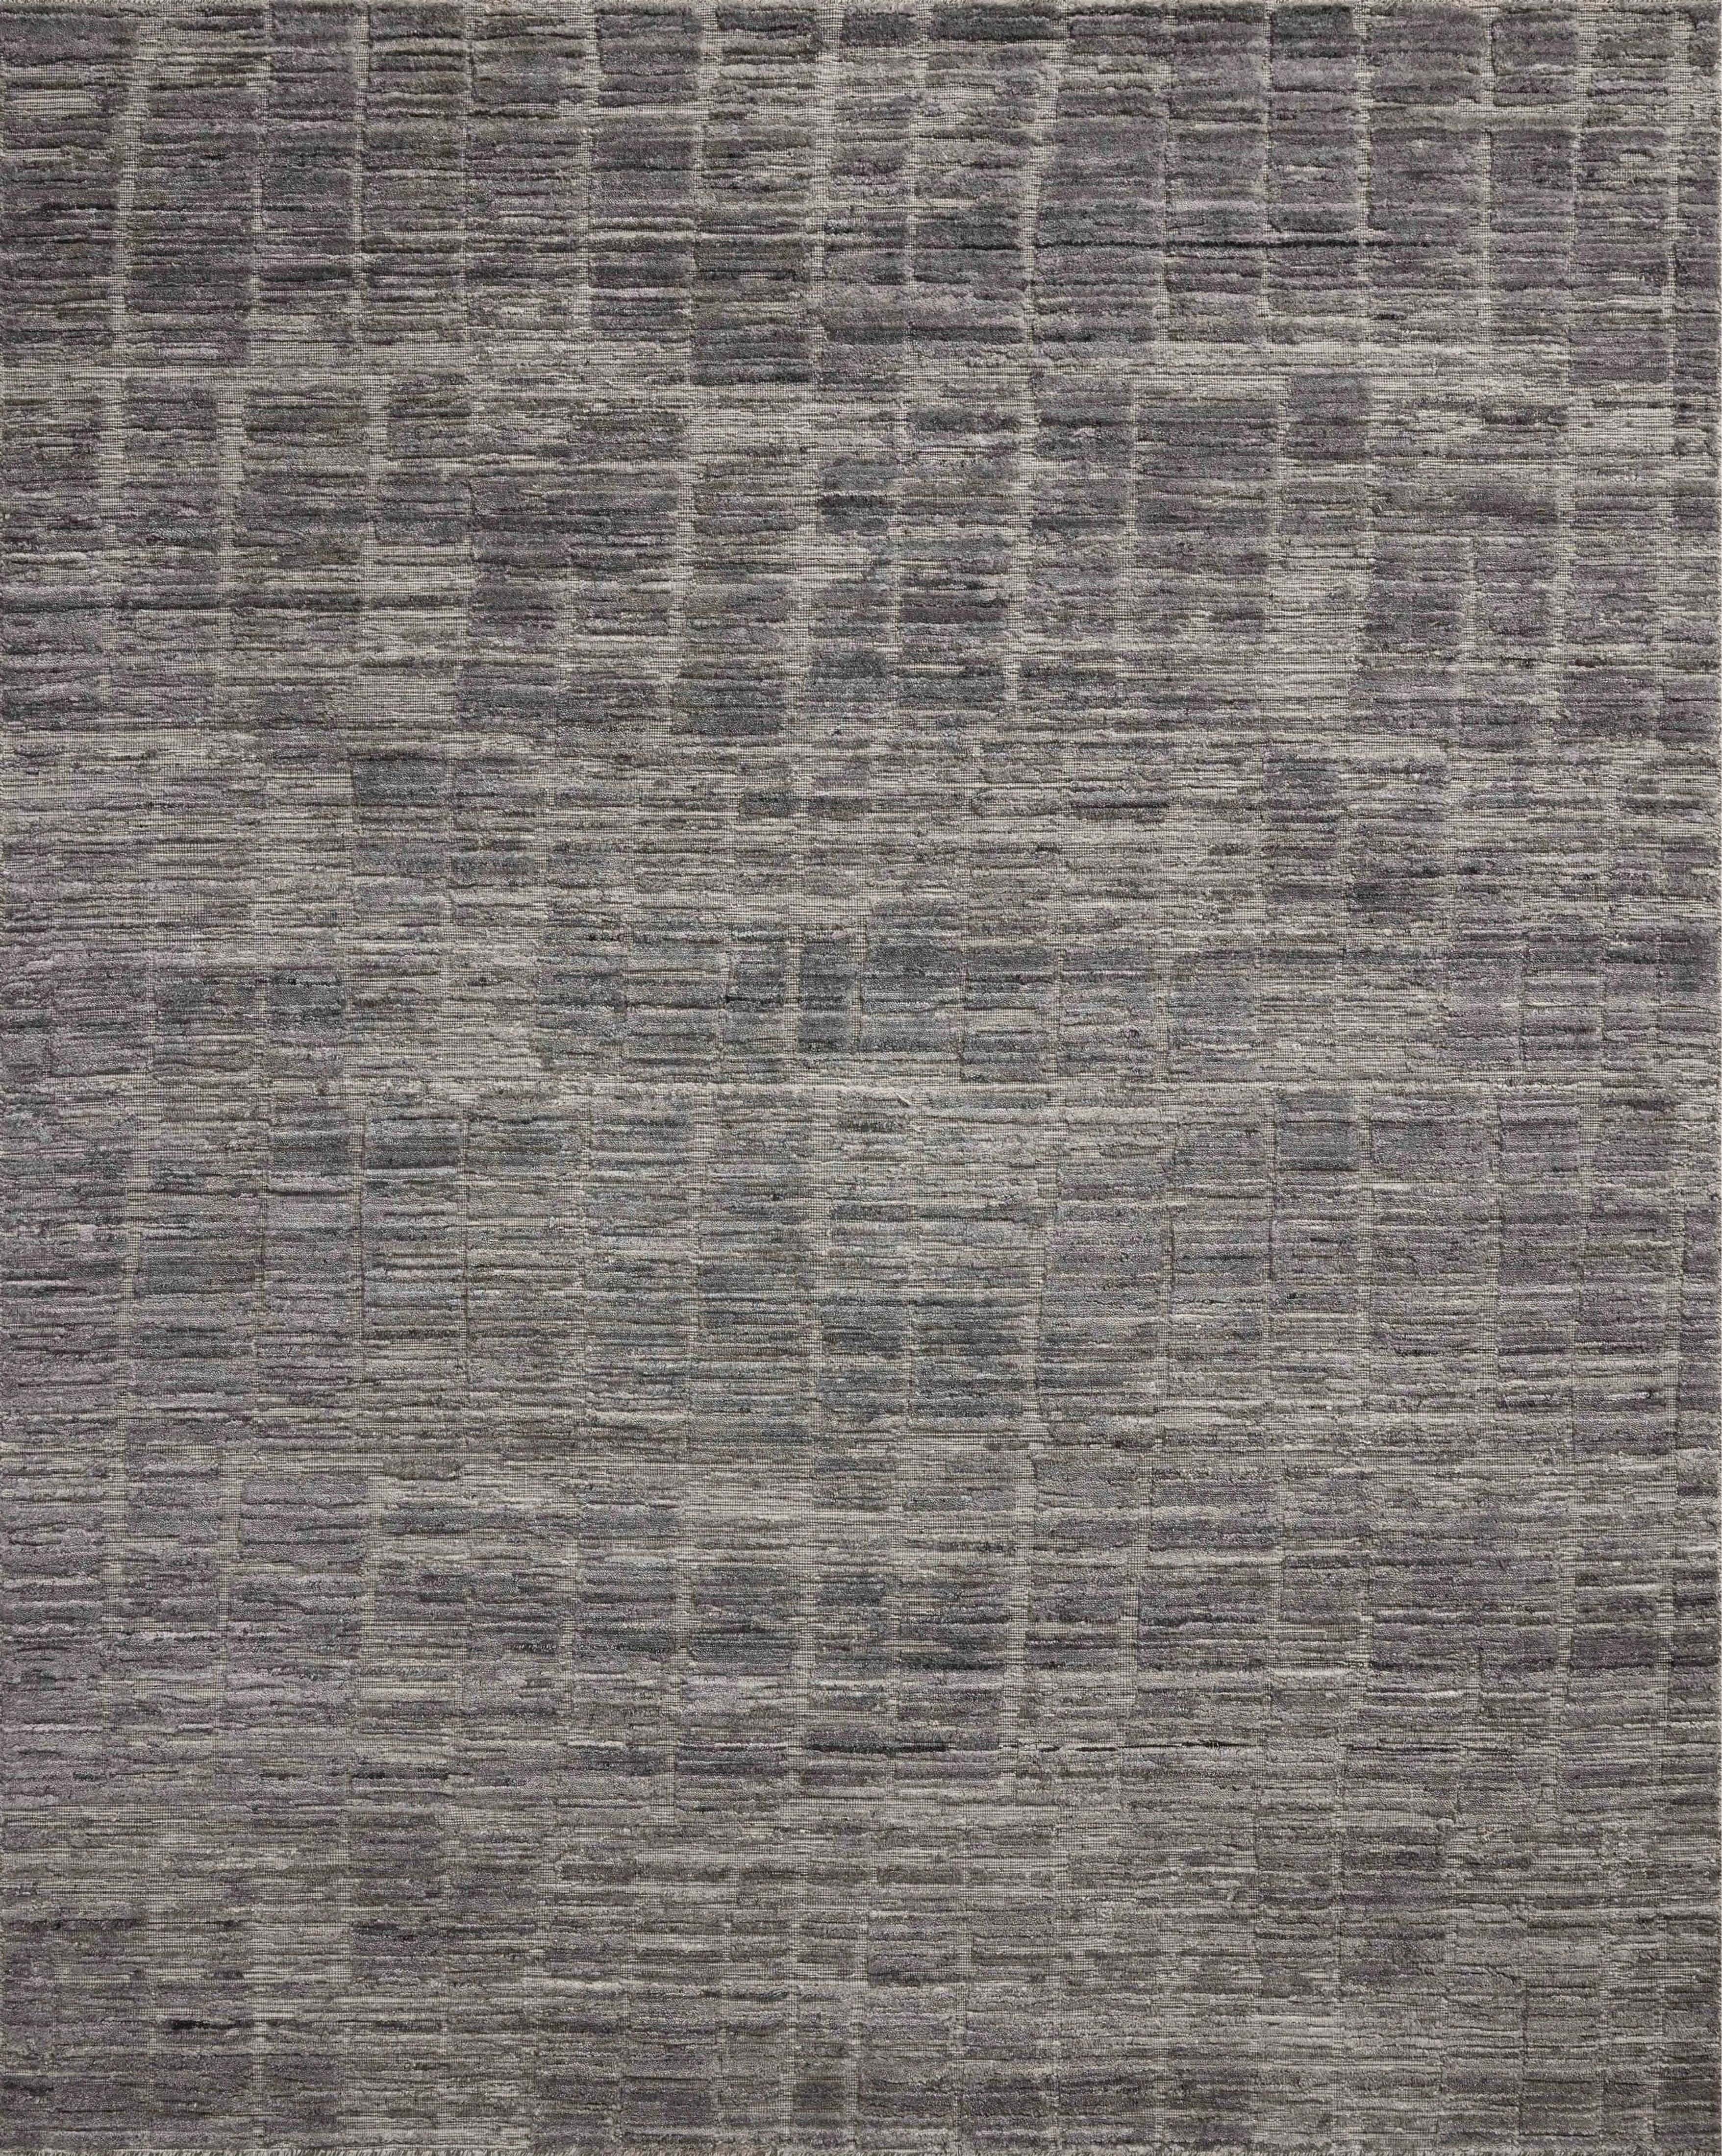 Area rugs in the Daniel Slate Rug have a graphic design in a range of tonal palettes with a soft, gently ribbed texture. The hand-loomed pile is a blend of bamboo and wool with a slight sheen that captures the light and changes the rug’s sense of depth throughout the day. Amethyst Home provides interior design, new home construction design consulting, vintage area rugs, and lighting in the Park City metro area.